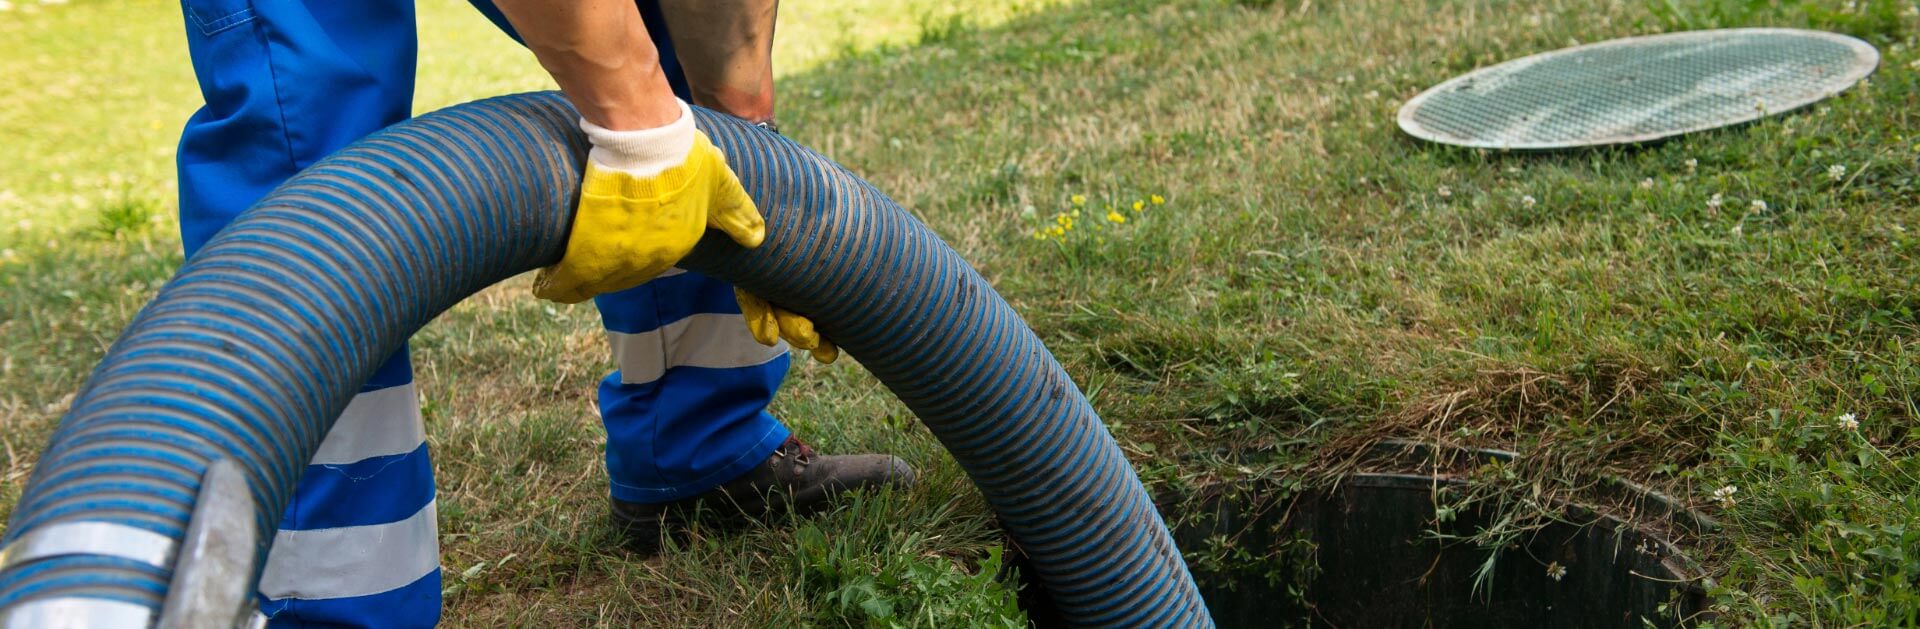 Three Reasons to Schedule Your Septic Pumping , 